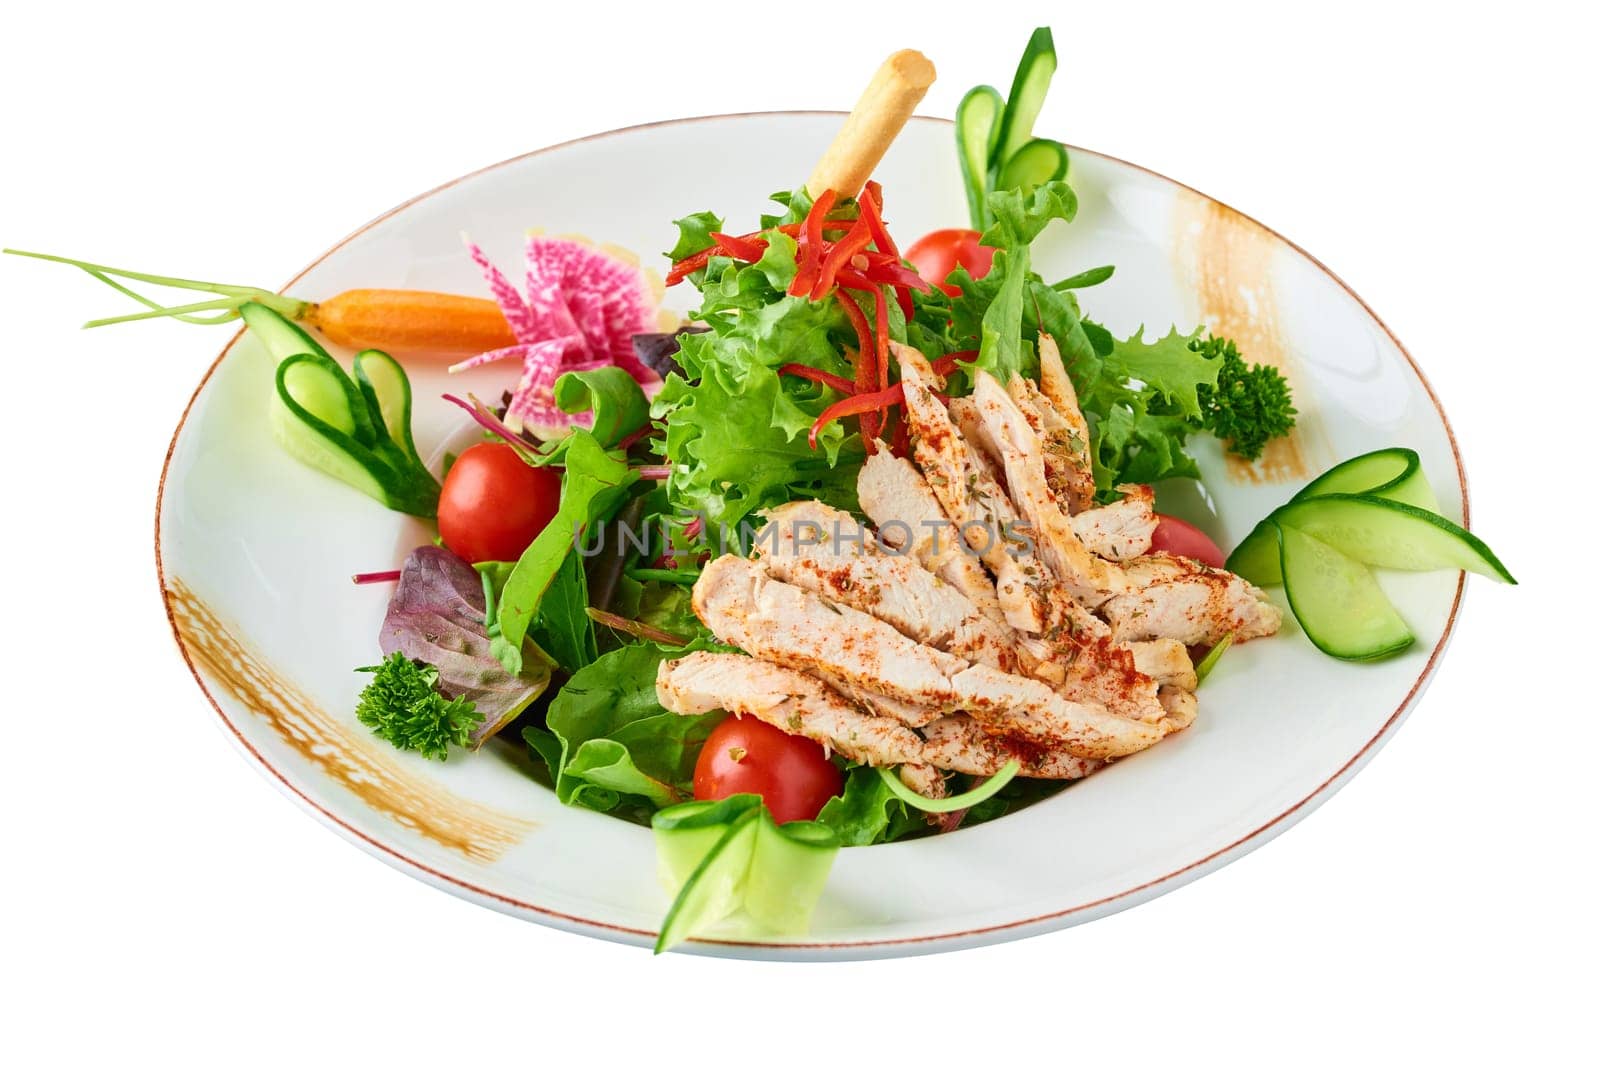 Fresh salad with grilled chicken breast, arugula and tomato. Top view by Sonat